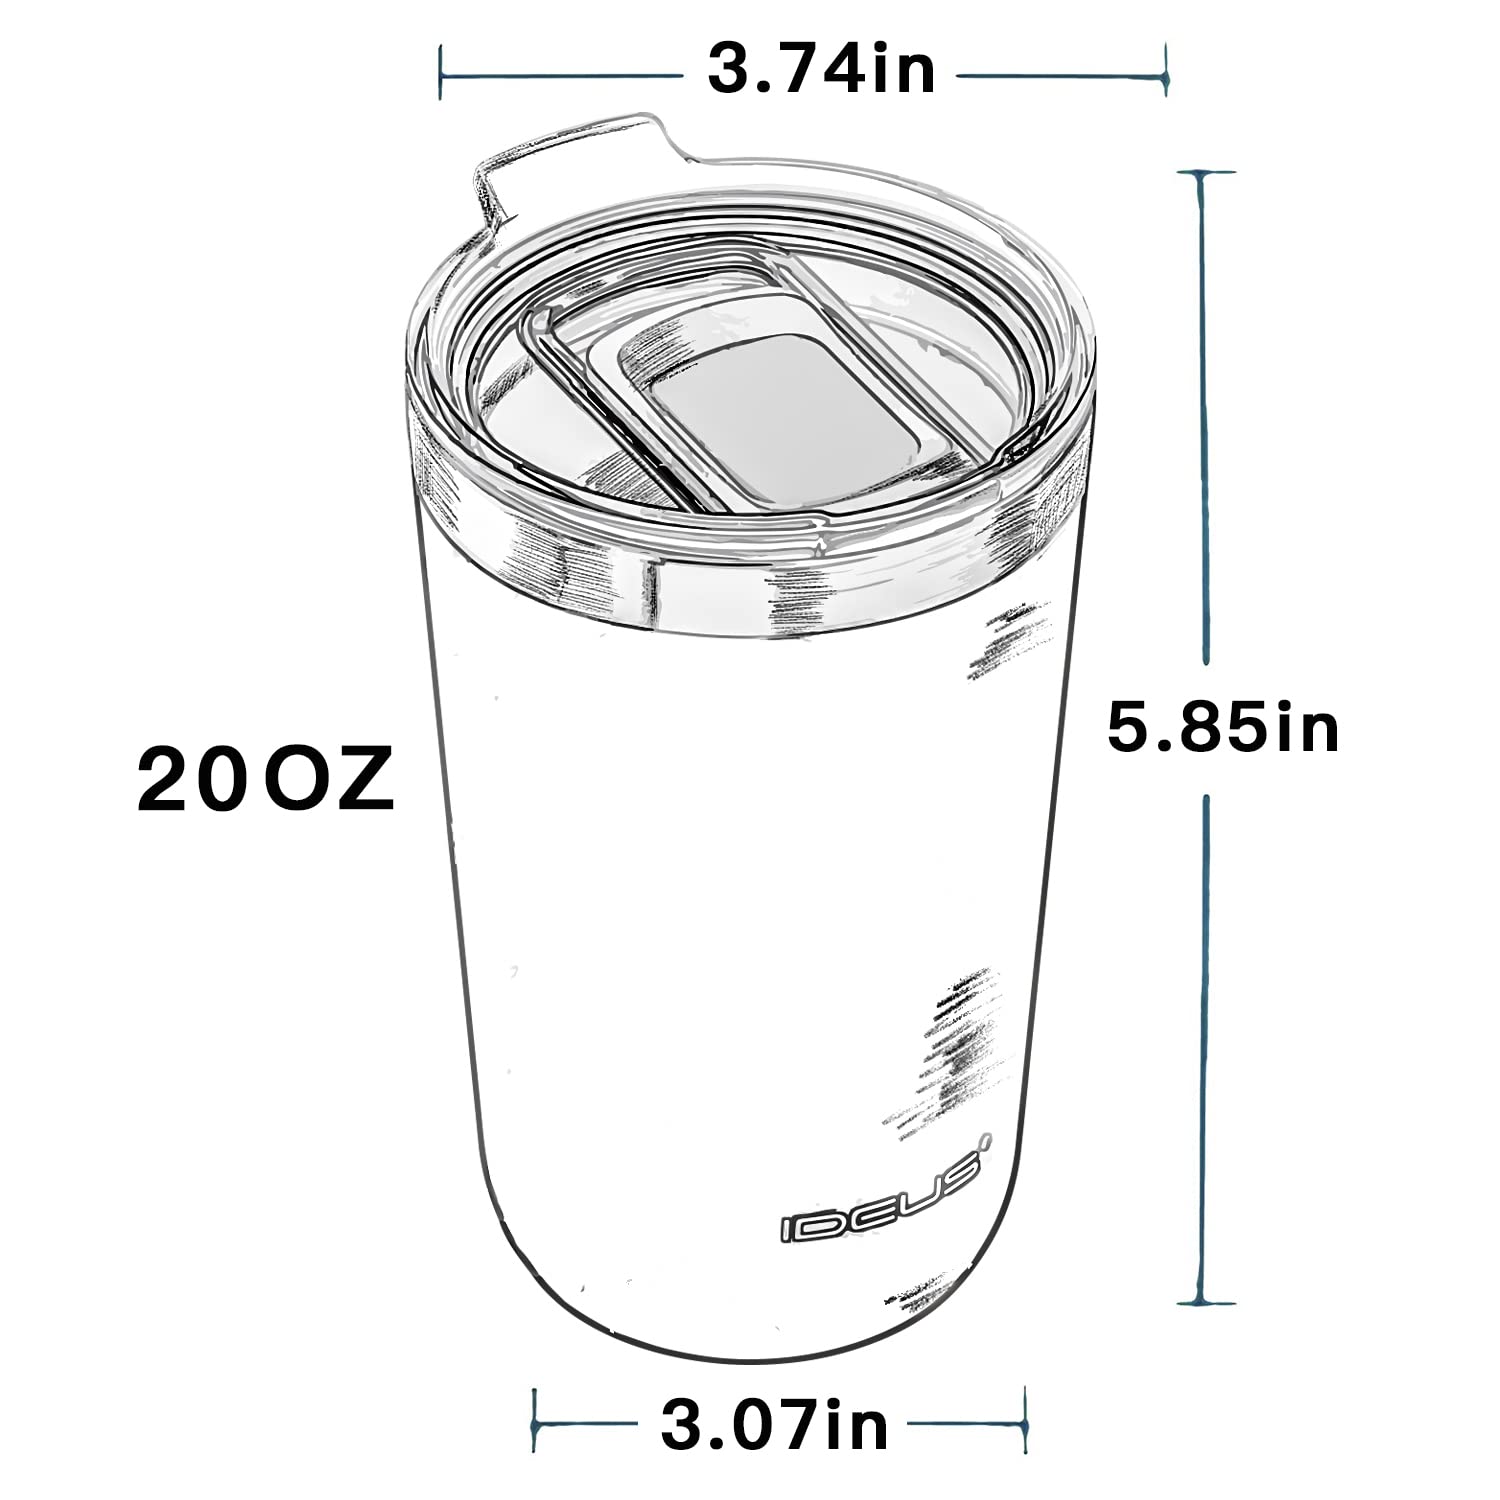 Ideus 20 oz Tumbler, Travel Coffee Mug with Splash Proof Sliding Lid, Double Wall Stainless Steel Vacuum Insulated Coffee Mug for Home and Office, Keep Beverages Hot or Cold, Black